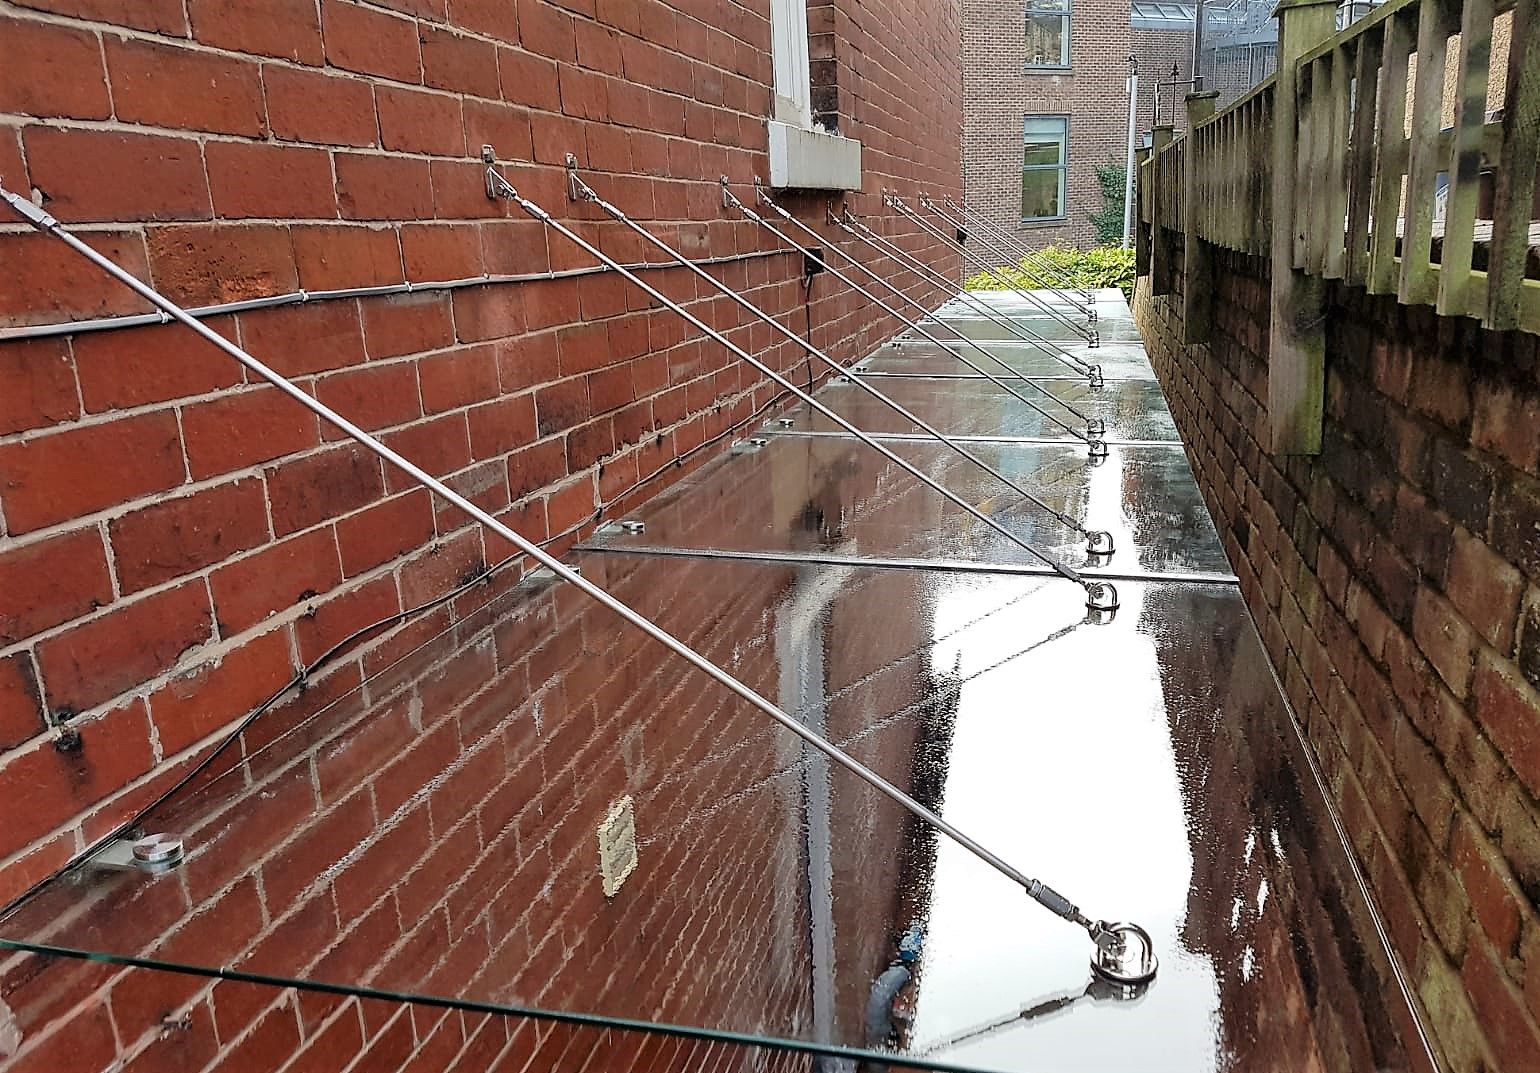 Glass alleyway canopy system